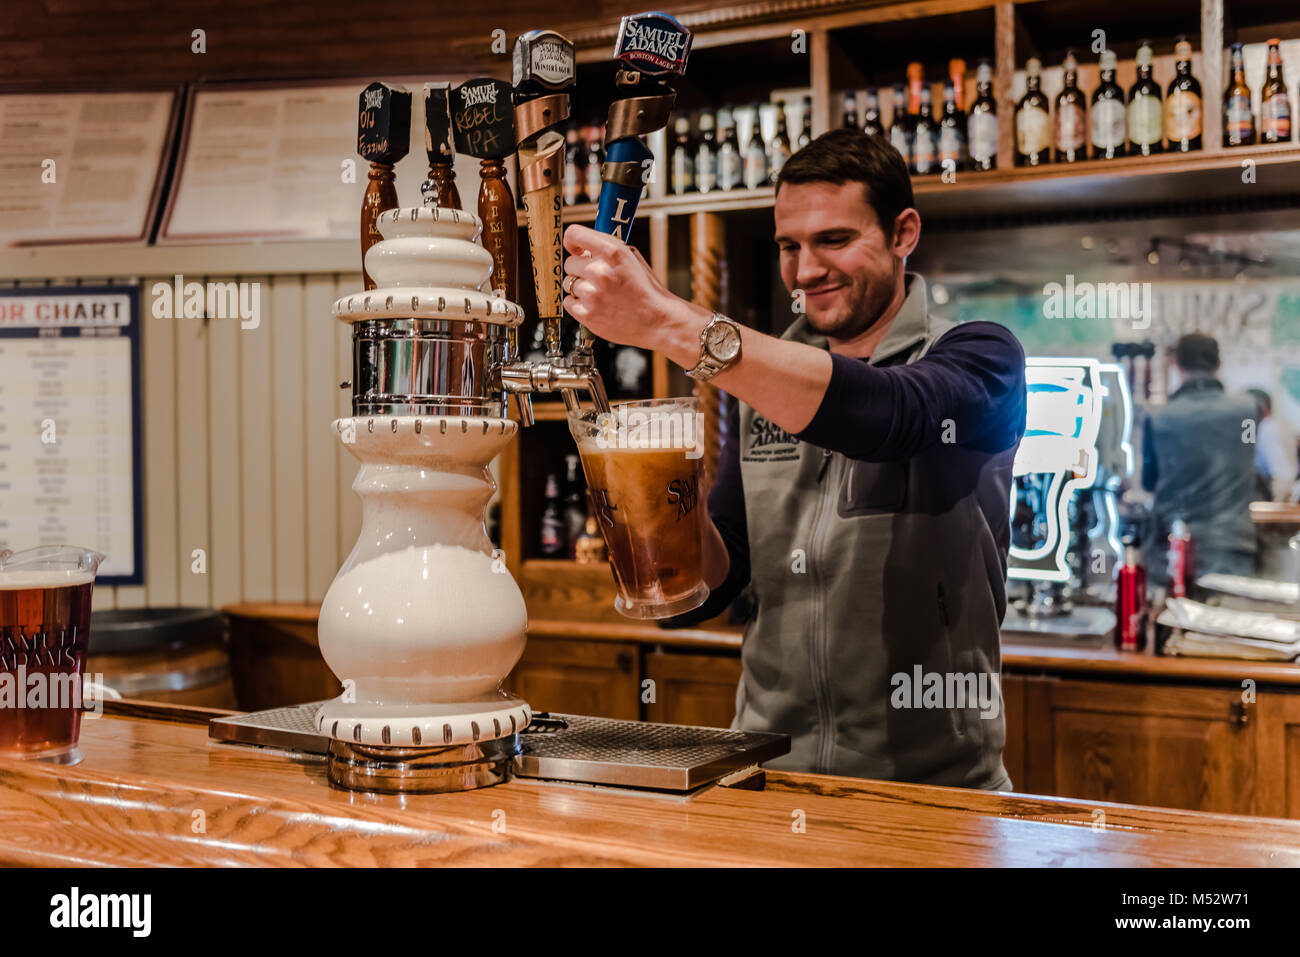 Bartender fills pitcher of beer at tap station well stocked with a variety of Samual Adams brews. The well-known brewery with a long history lures loc Stock Photo